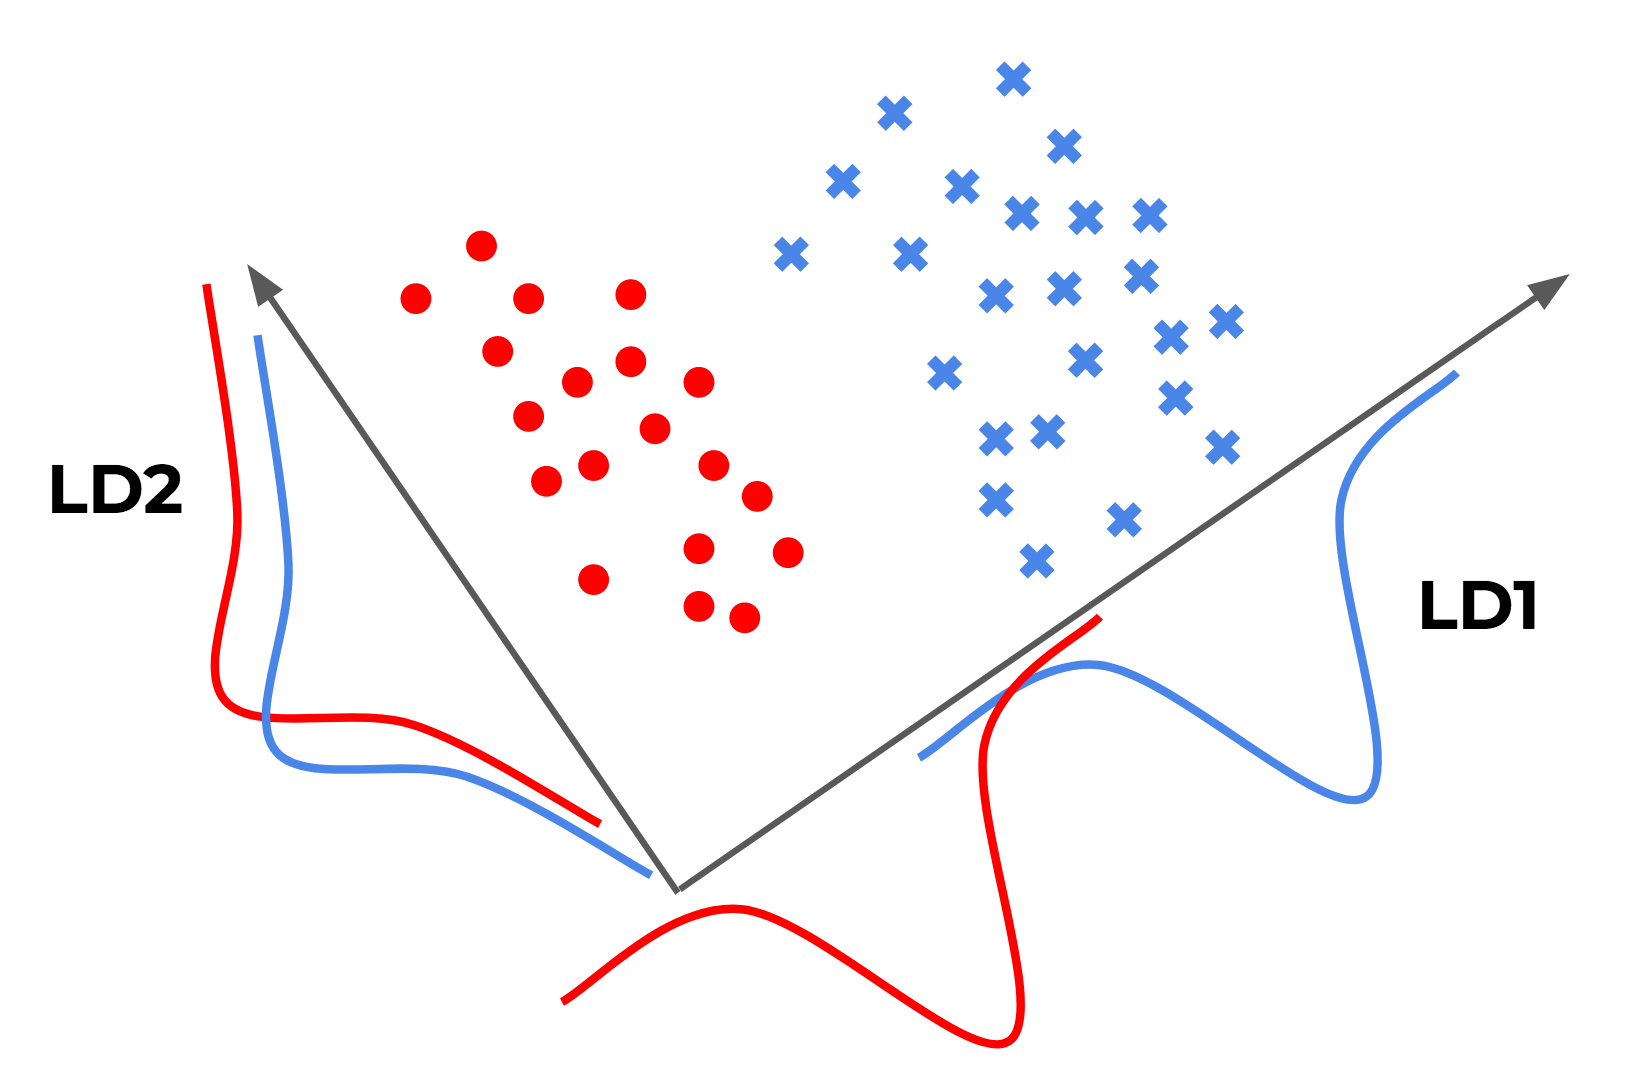 Projections of two-dimensional data (in two clusters) onto the x and y axes